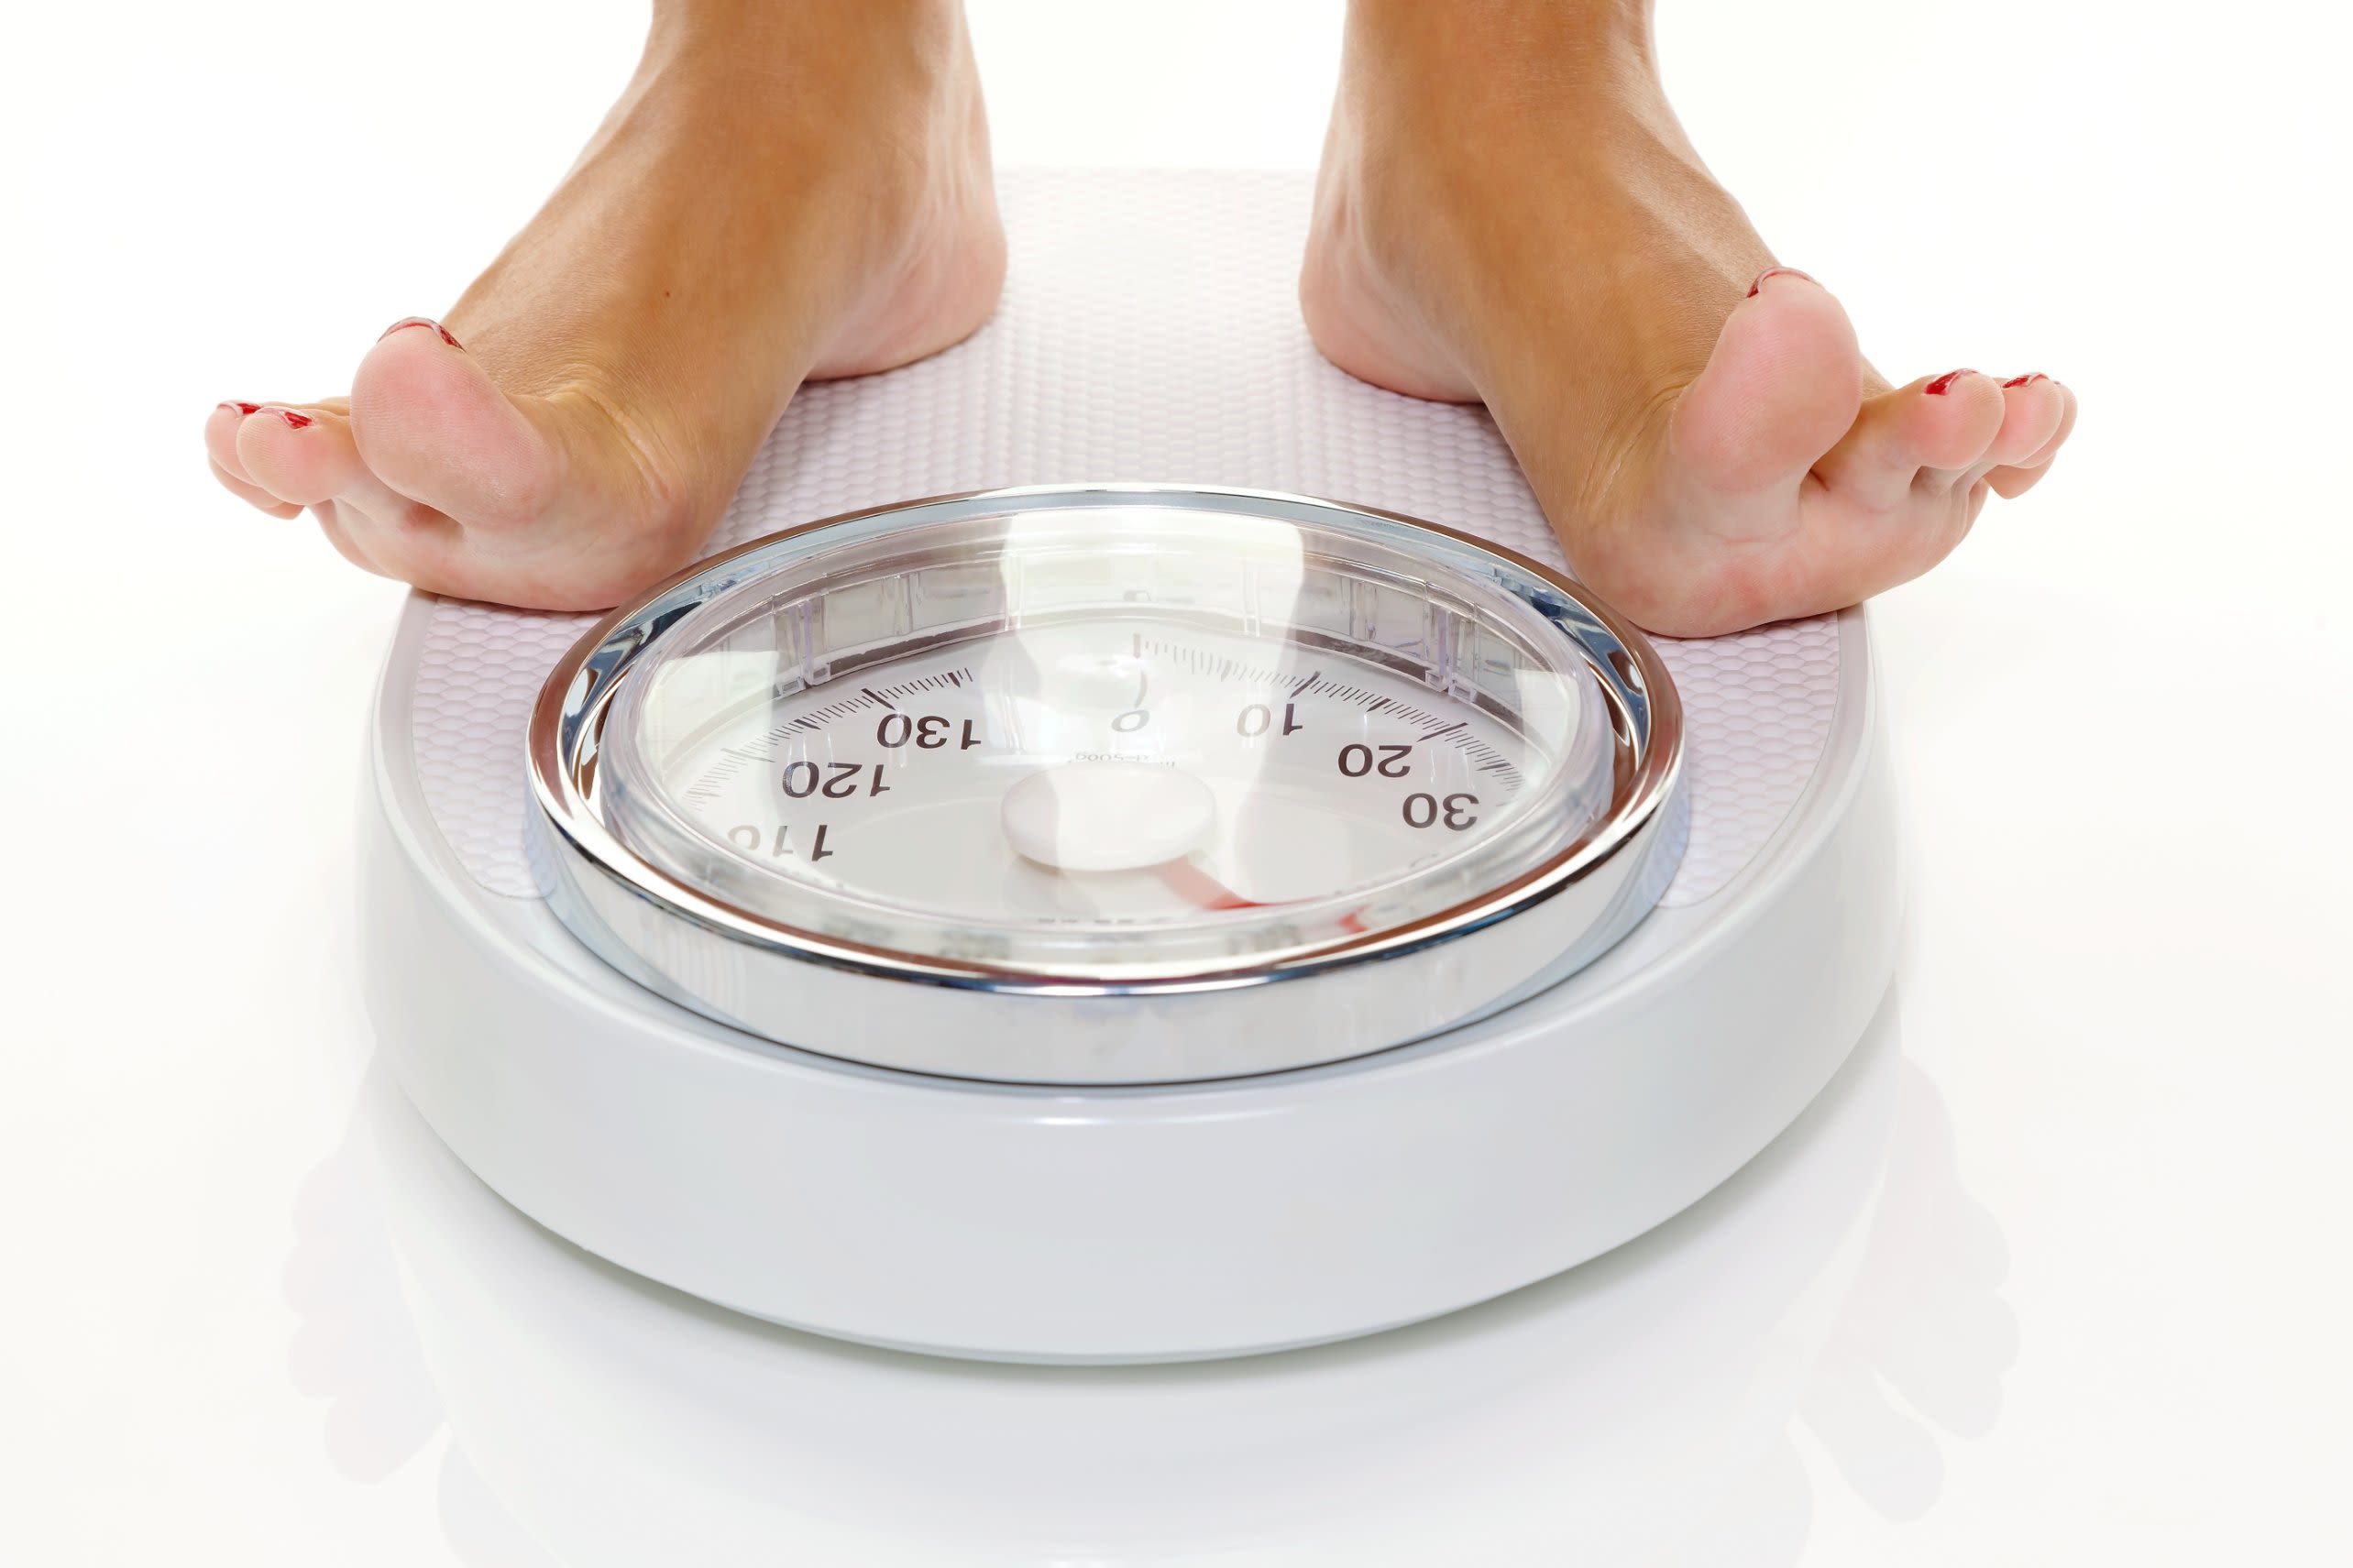 Consistency is key for weight loss, study says